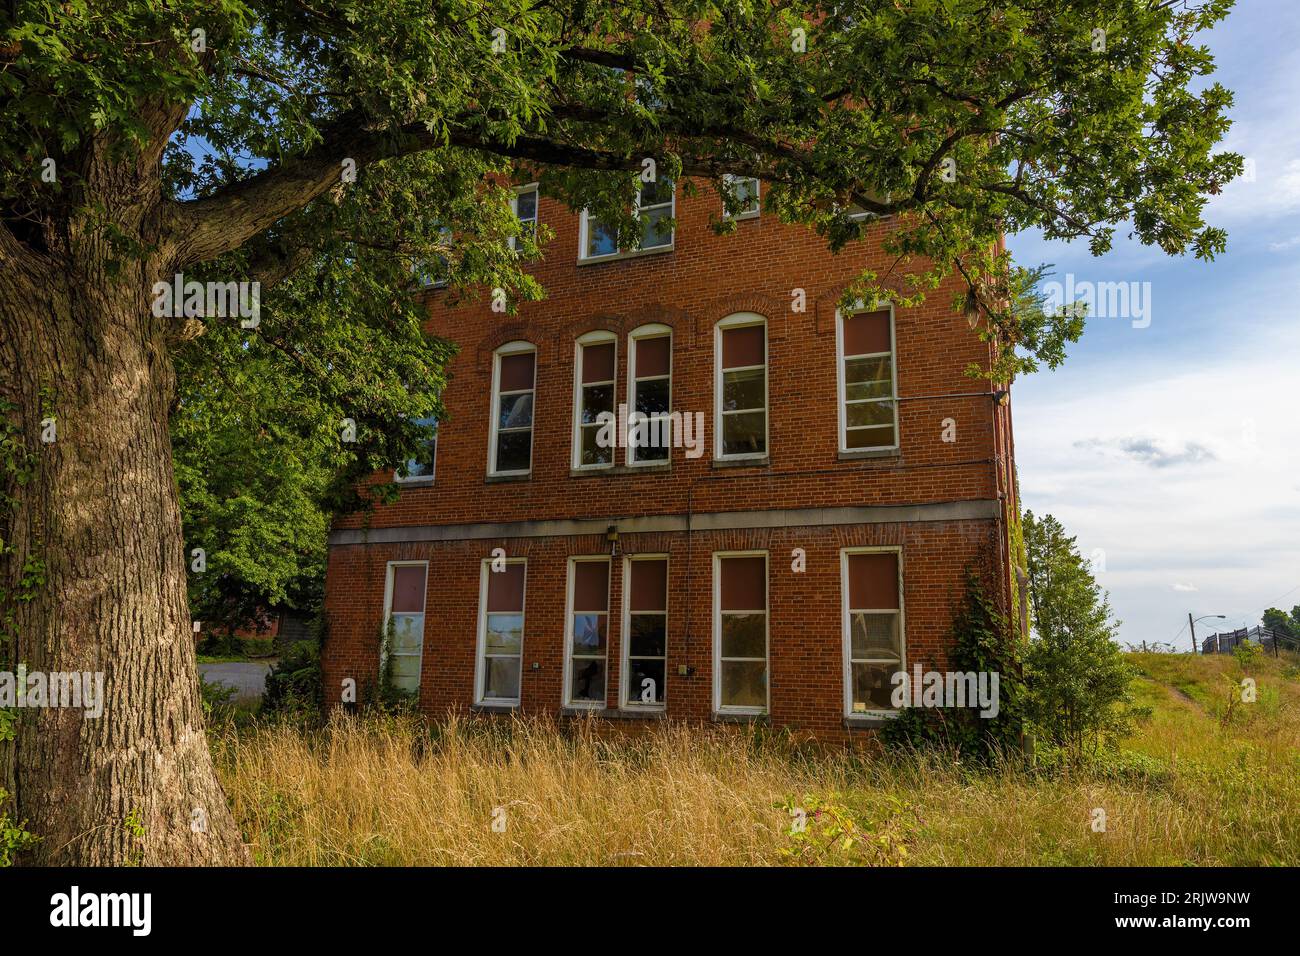 An abandoned brick building with broken windows and overgrown weed sits behind a tree under cloudy skies Stock Photo